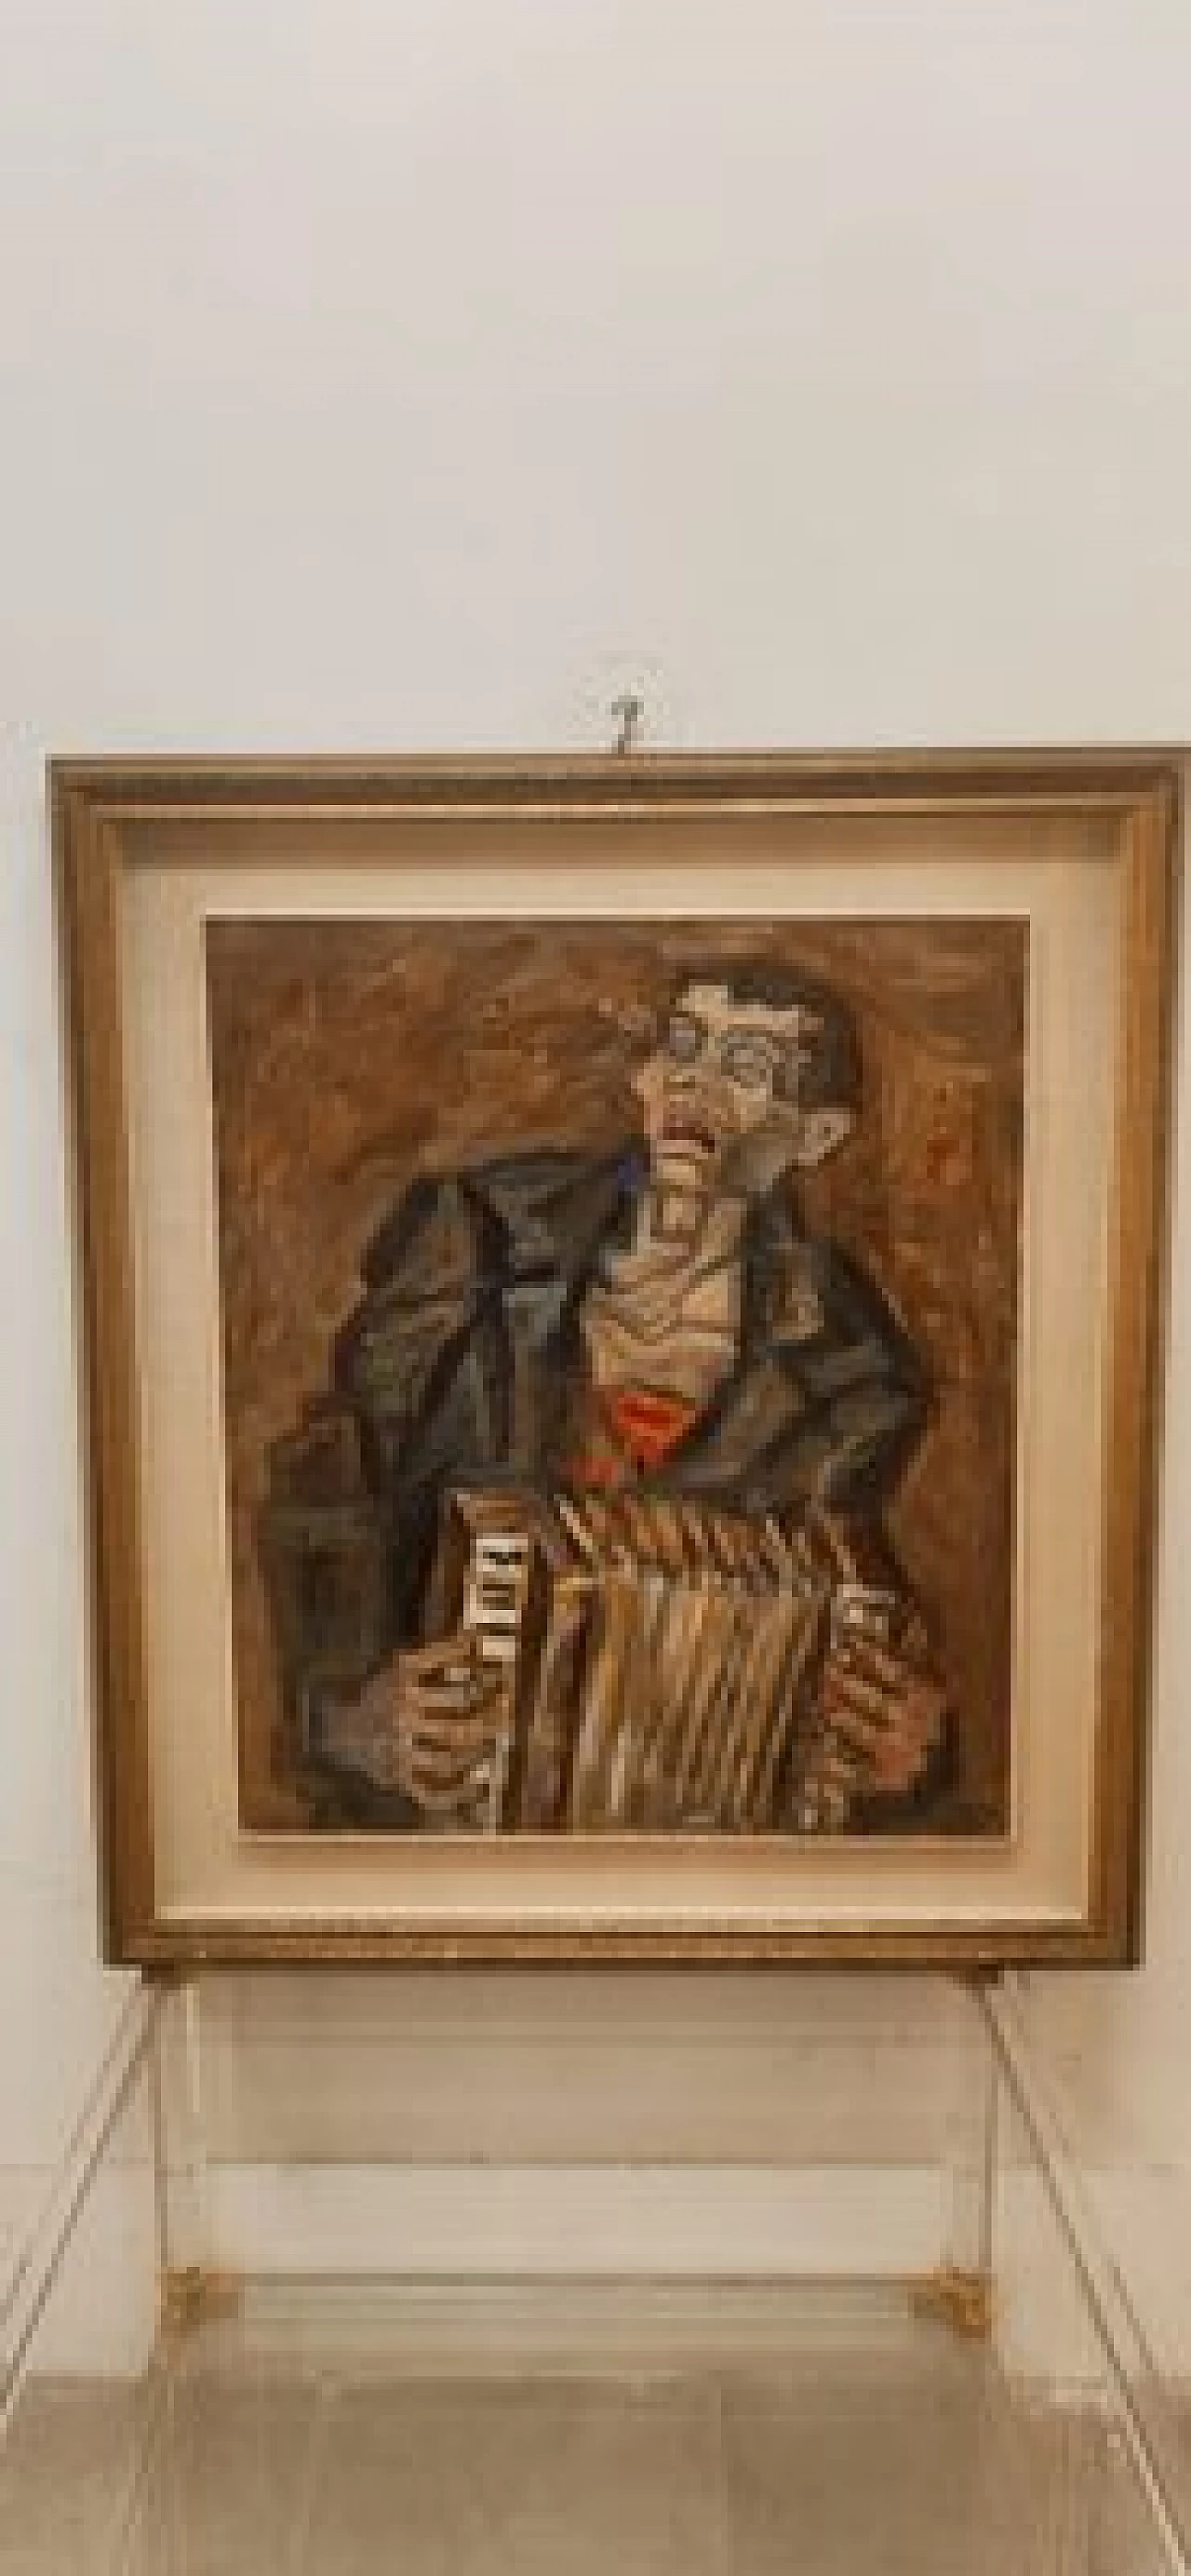 Emilio Notte, The blind musician, oil painting on canvas, 1970s 1